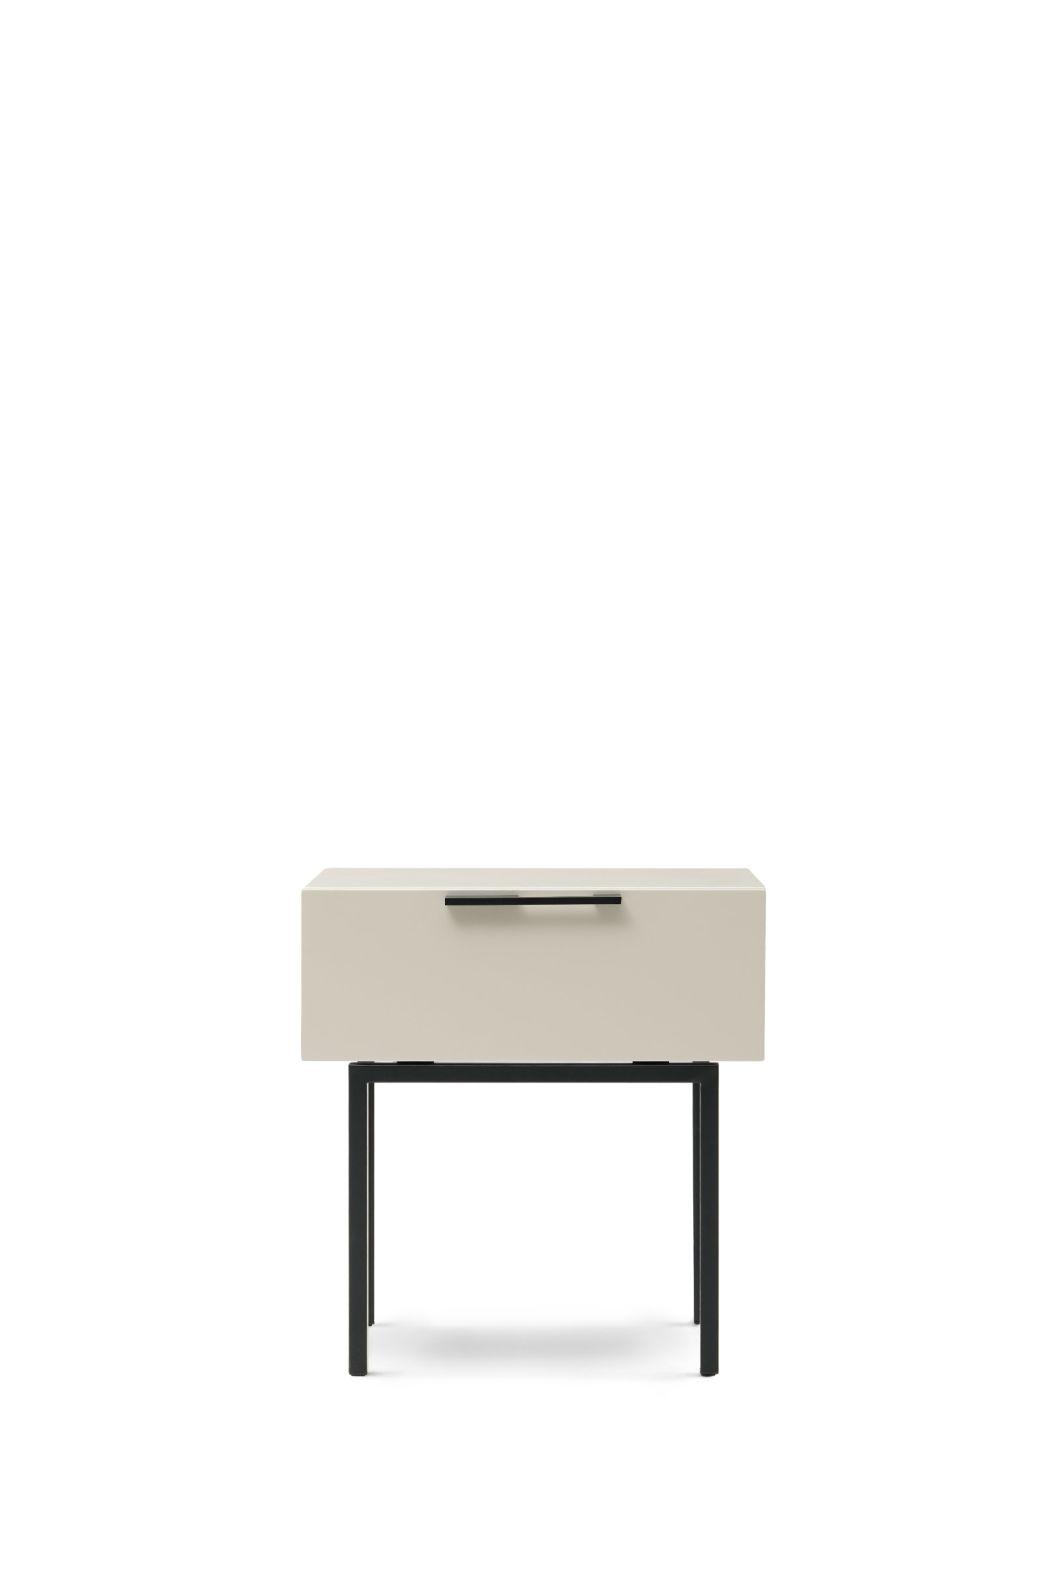 S-Ctg030 Wooden Night Stand, Latest Design Modern Night Table